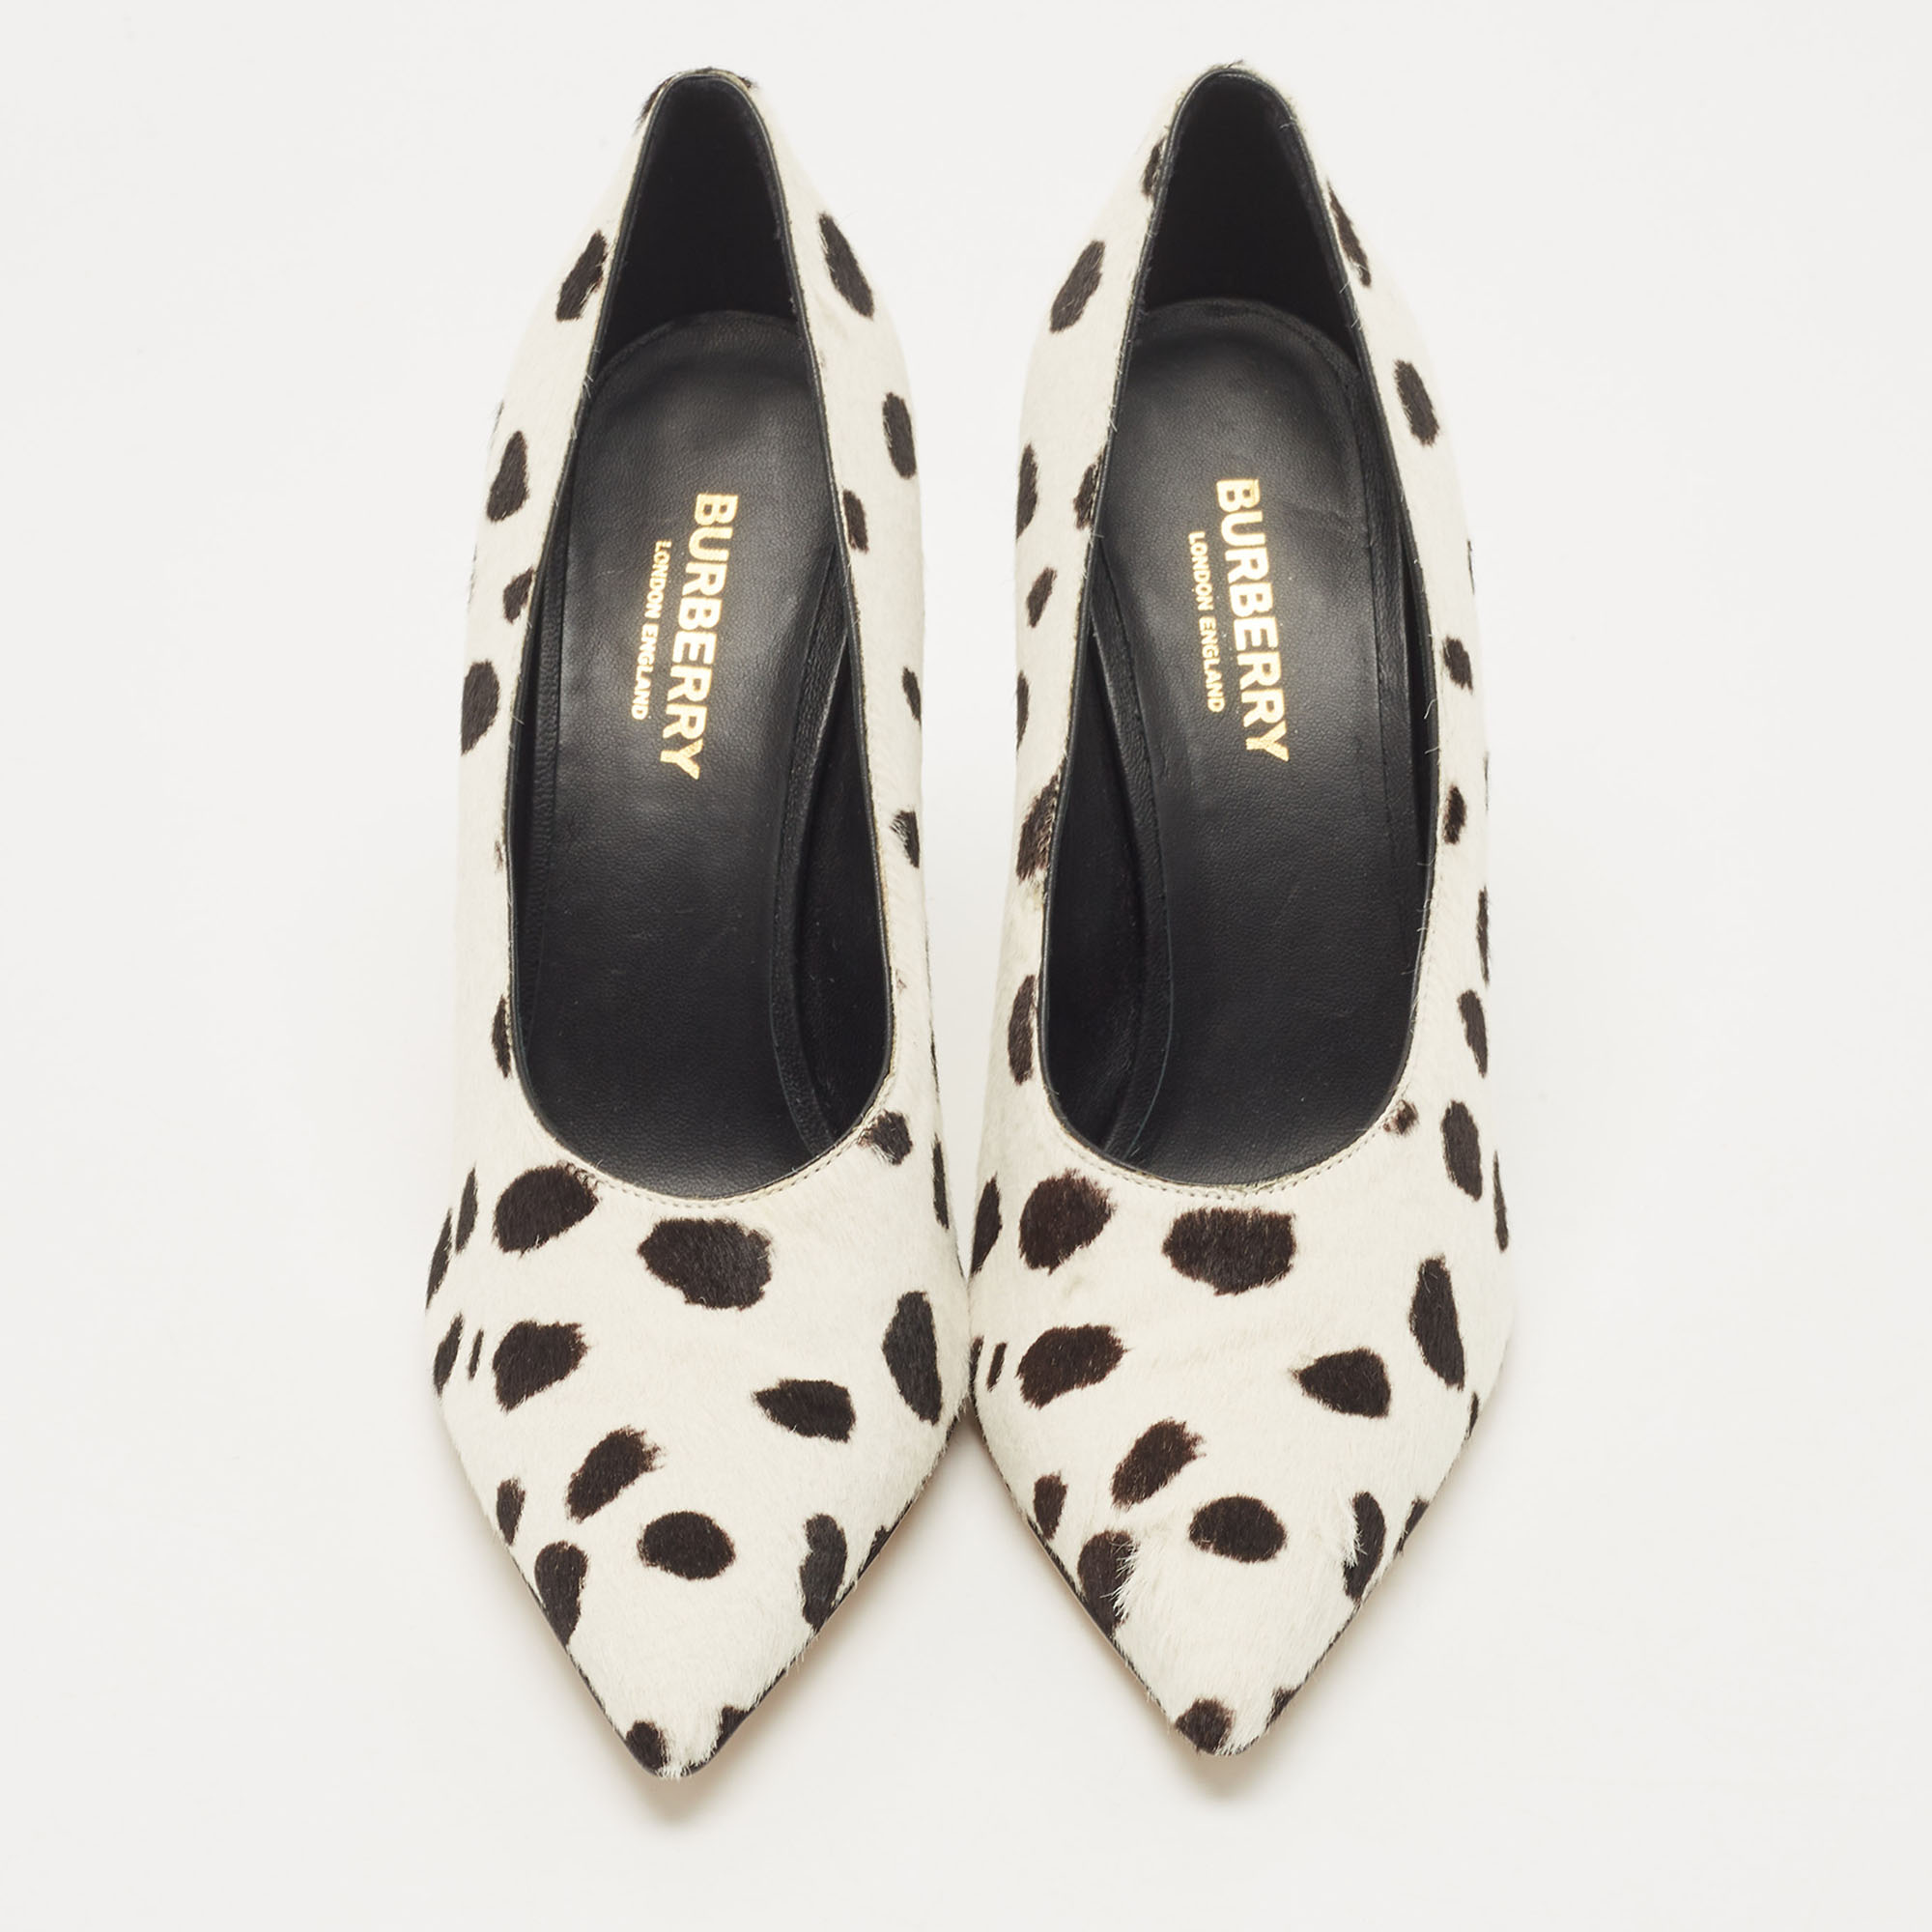 Burberry Black/White Calf Hair Ava Pointed Toe Pumps Size 36